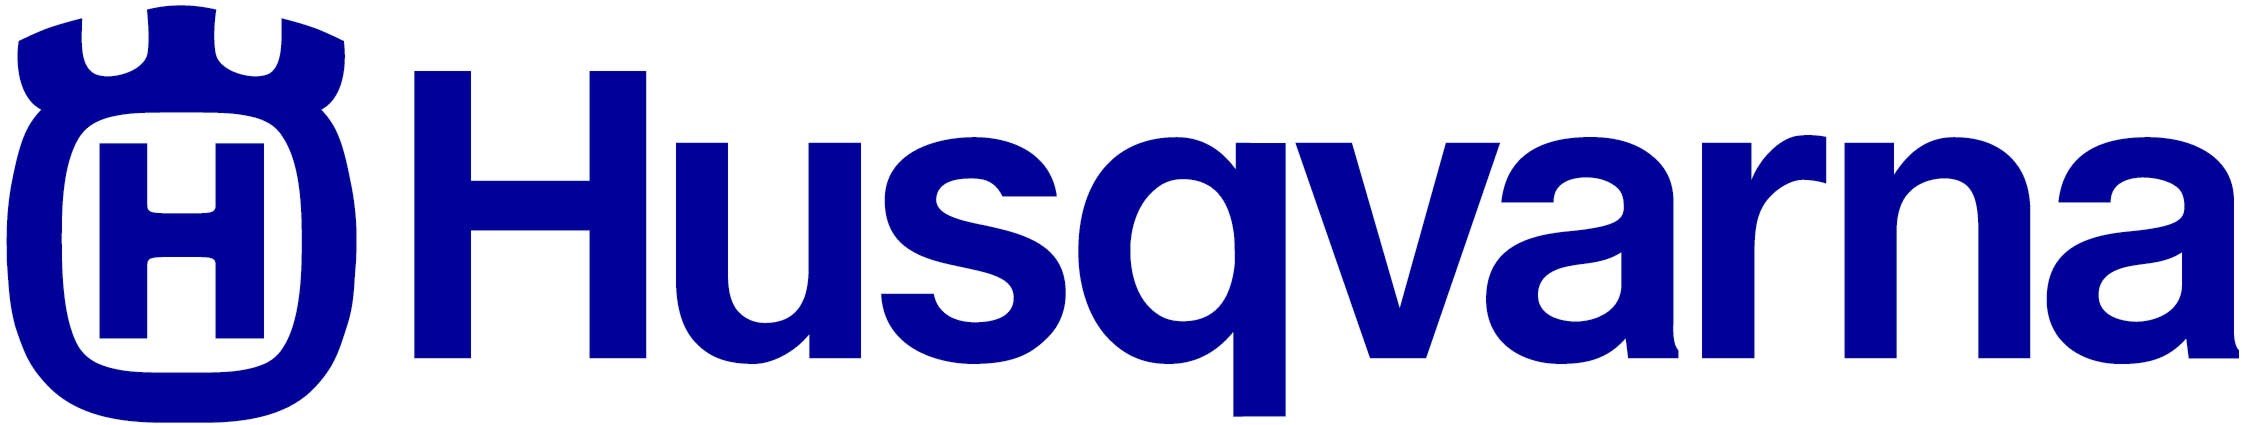 A blue text-based logo for Husqvarna against a white background.